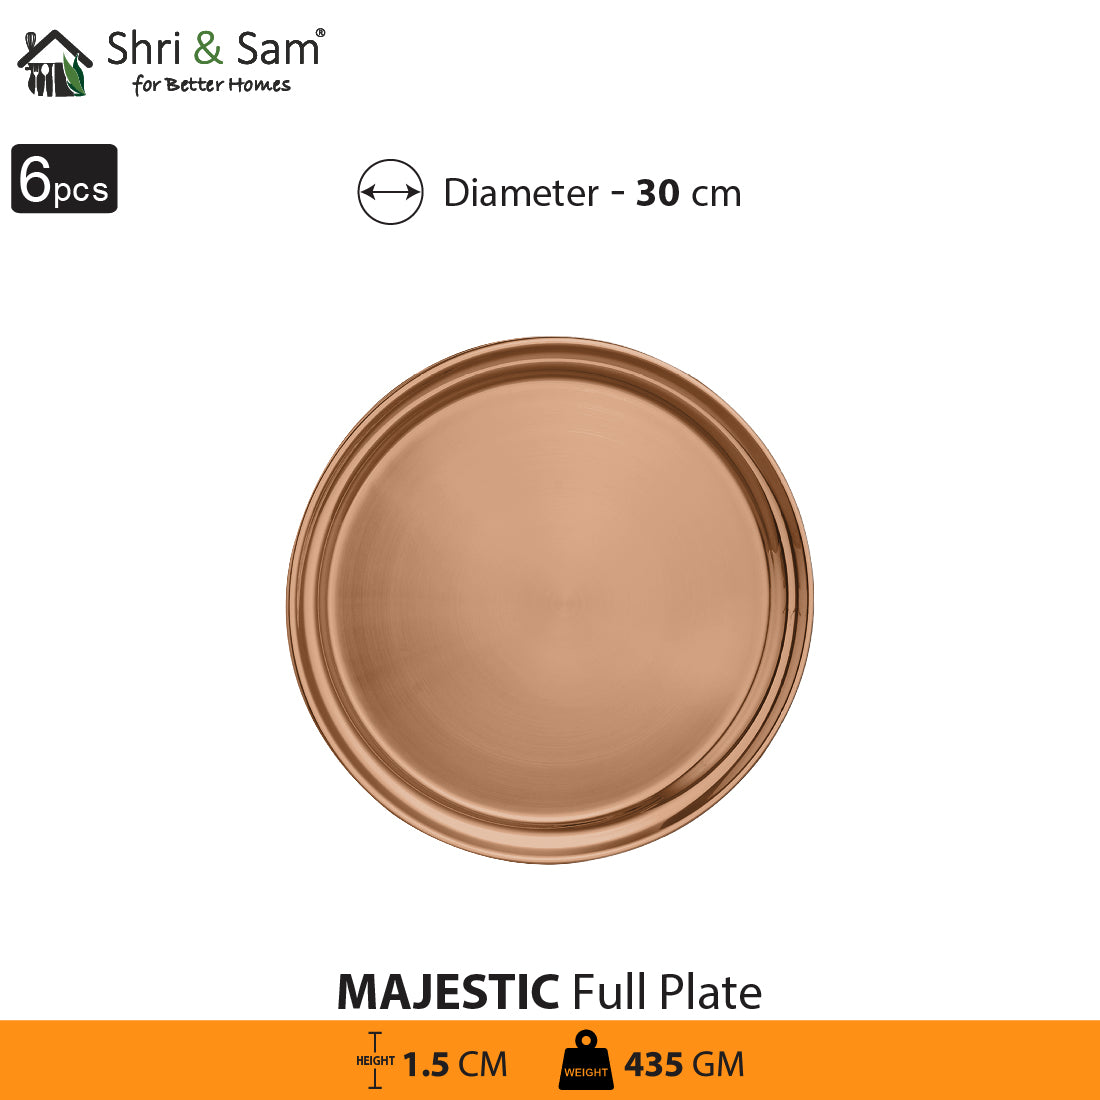 Stainless Steel 6 PCS Full Plate with Rose Gold PVD Coating Majestic